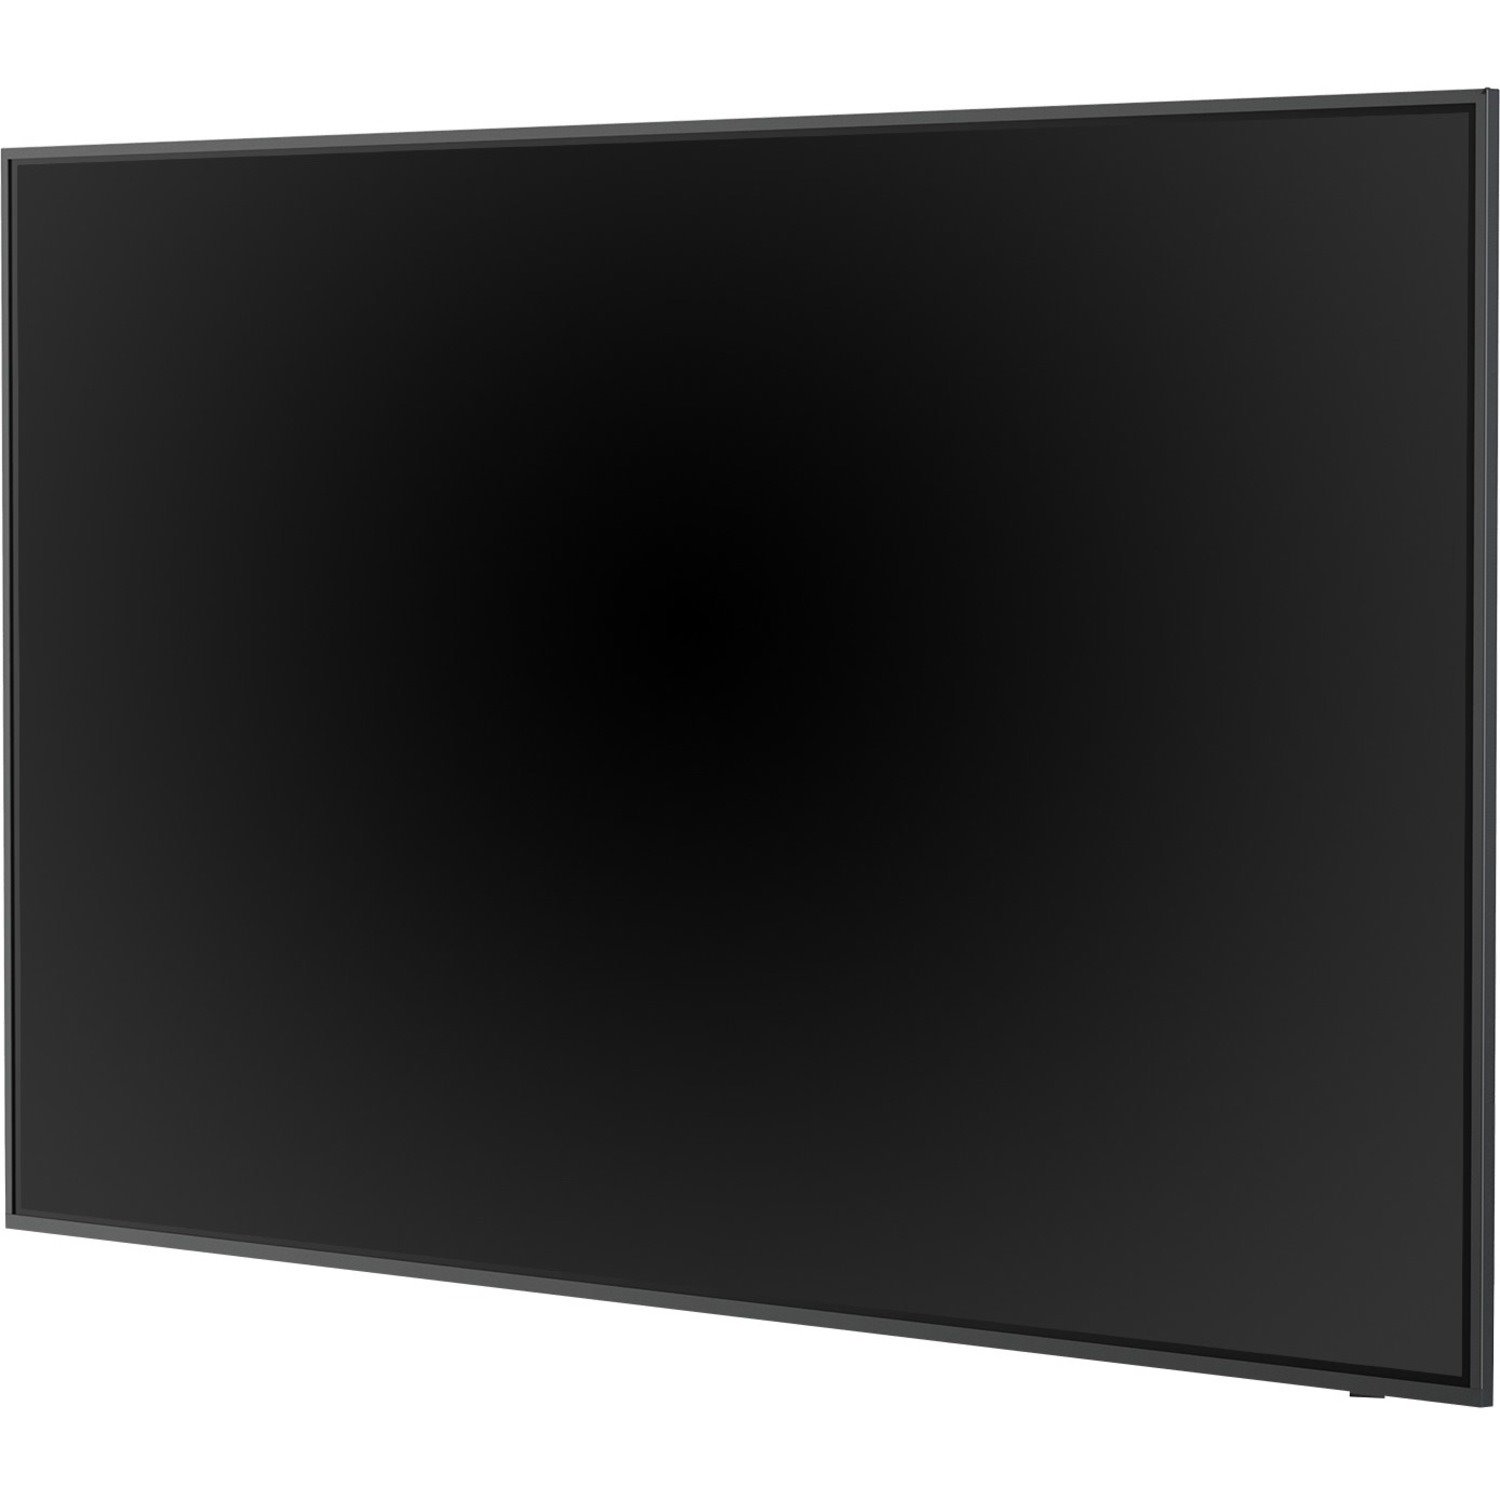 ViewSonic Commercial Display CDE6520-W - 4K 24/7 Operation, Integrated Software, 3GB RAM, 16GB Storage - 450 cd/m2 - 65"